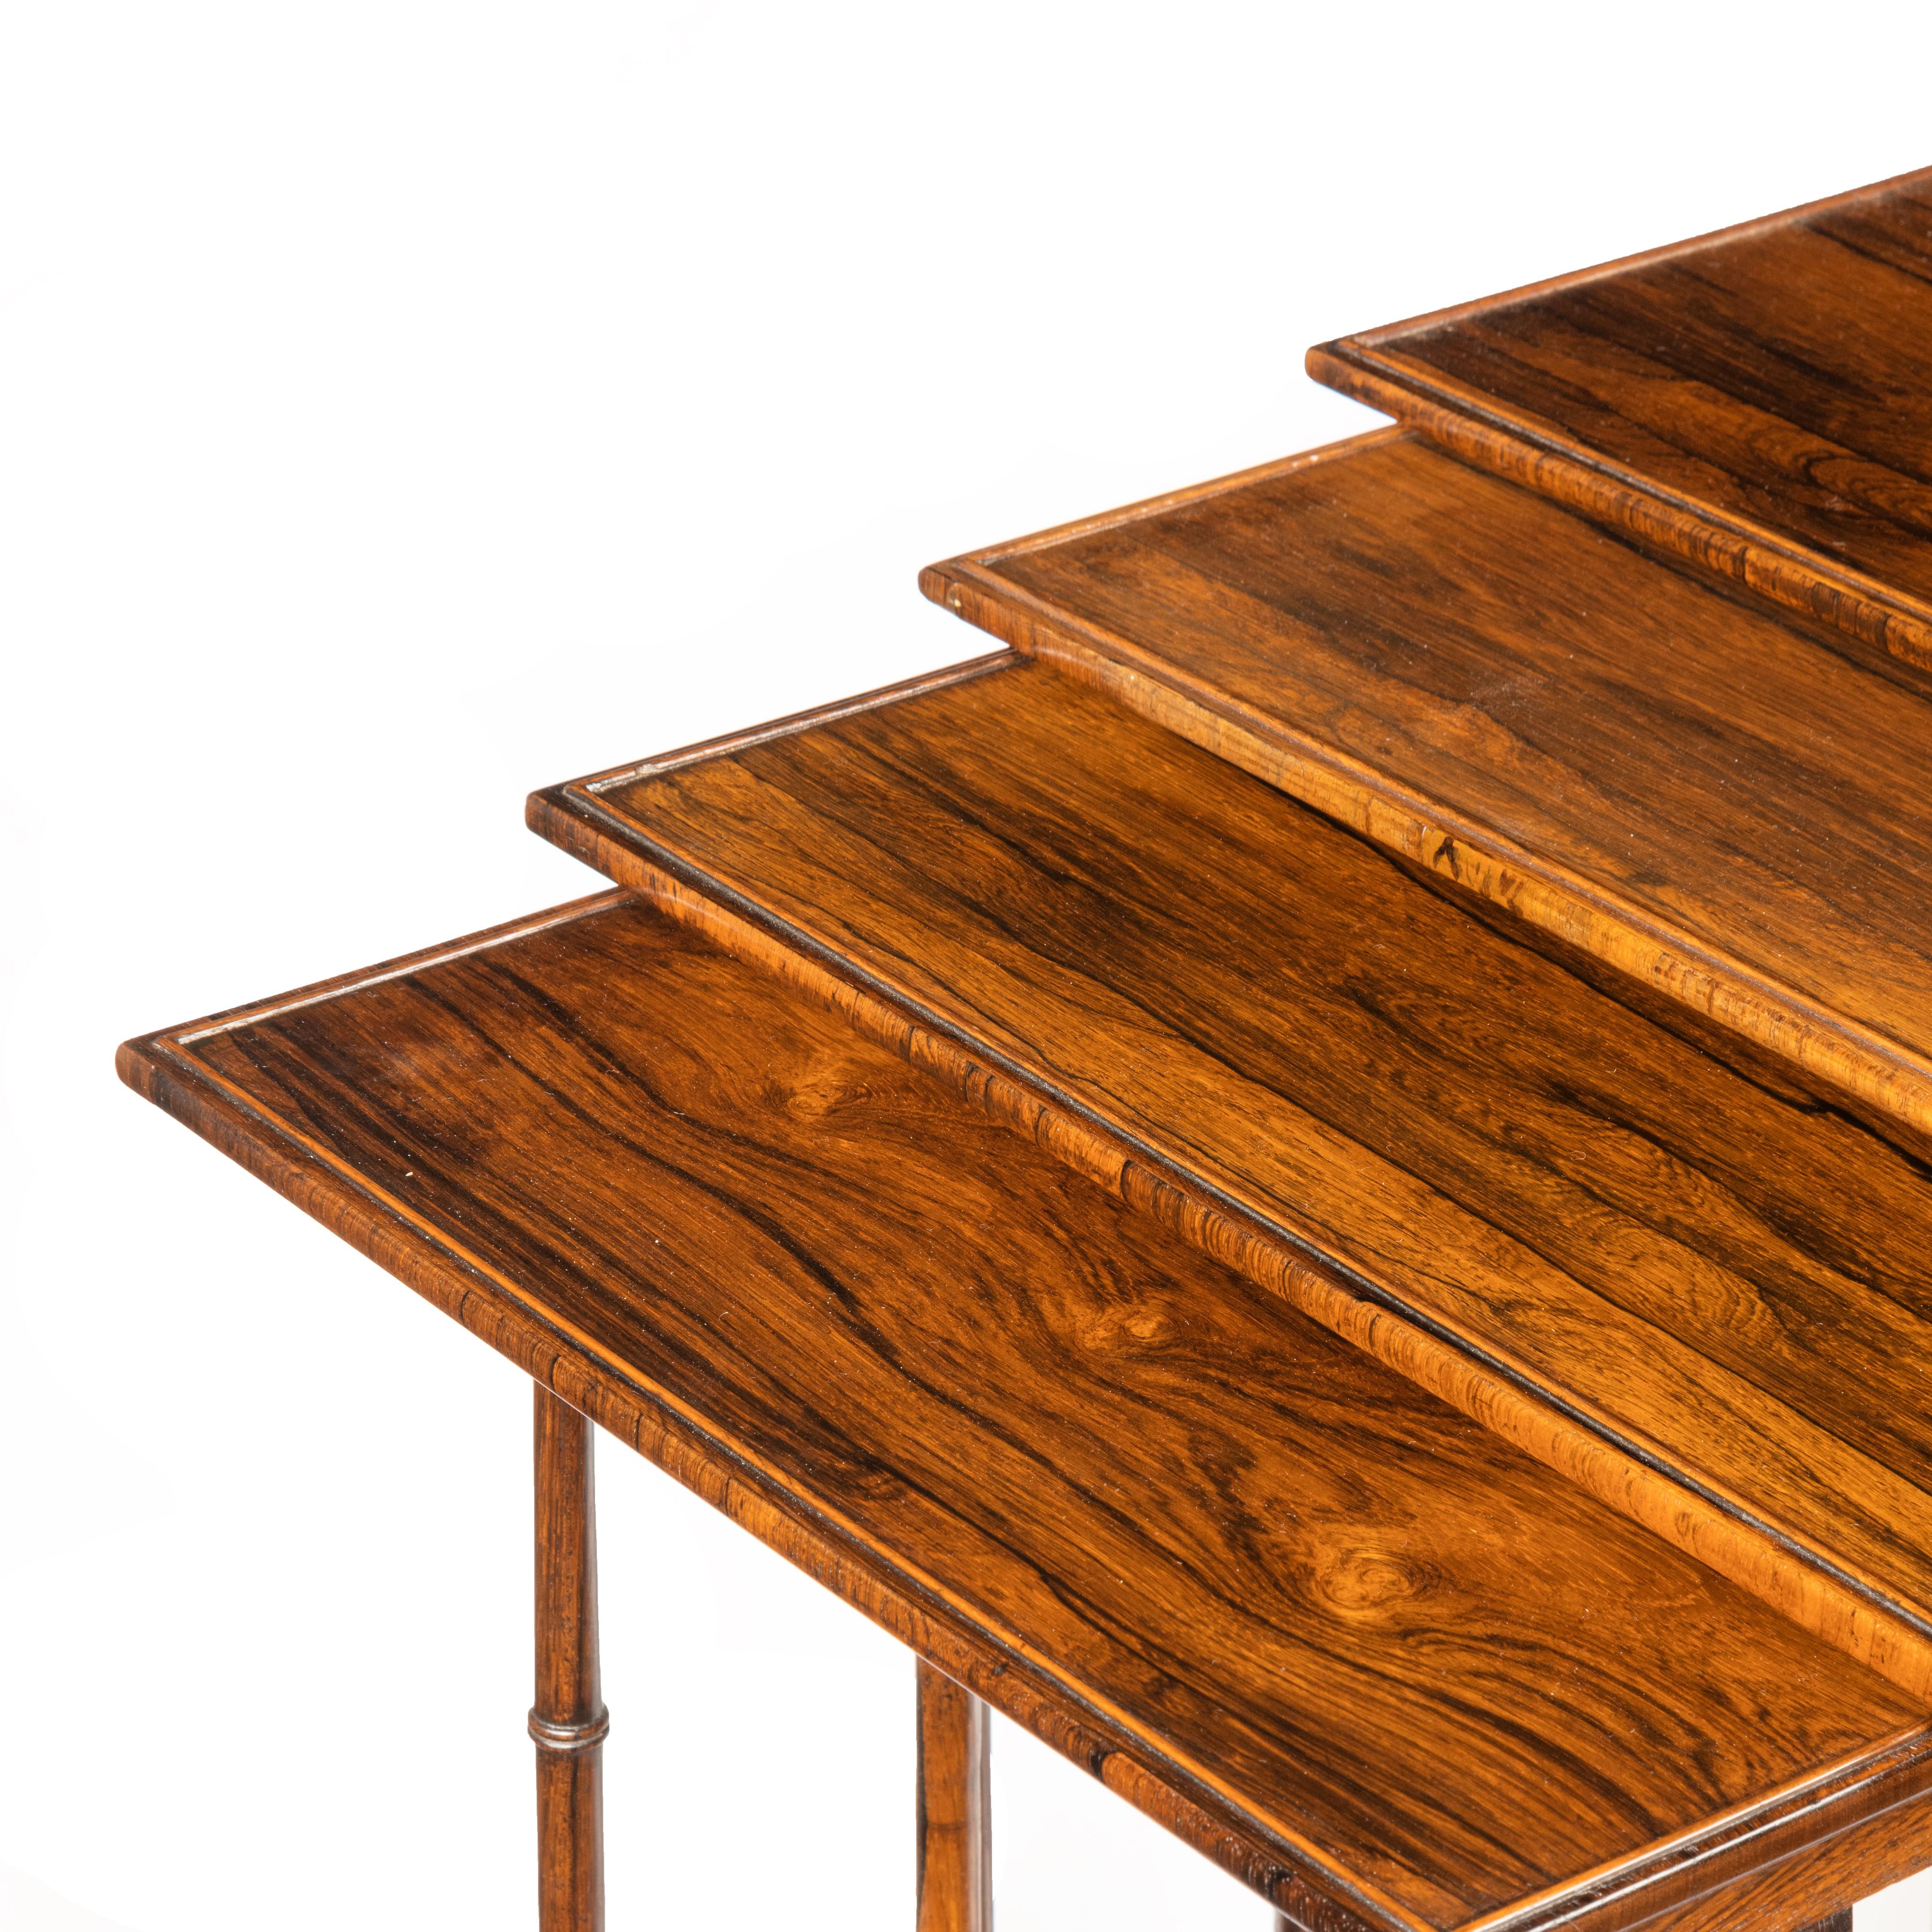 Regency Rosewood Quartetto Tables In Good Condition For Sale In Lymington, Hampshire